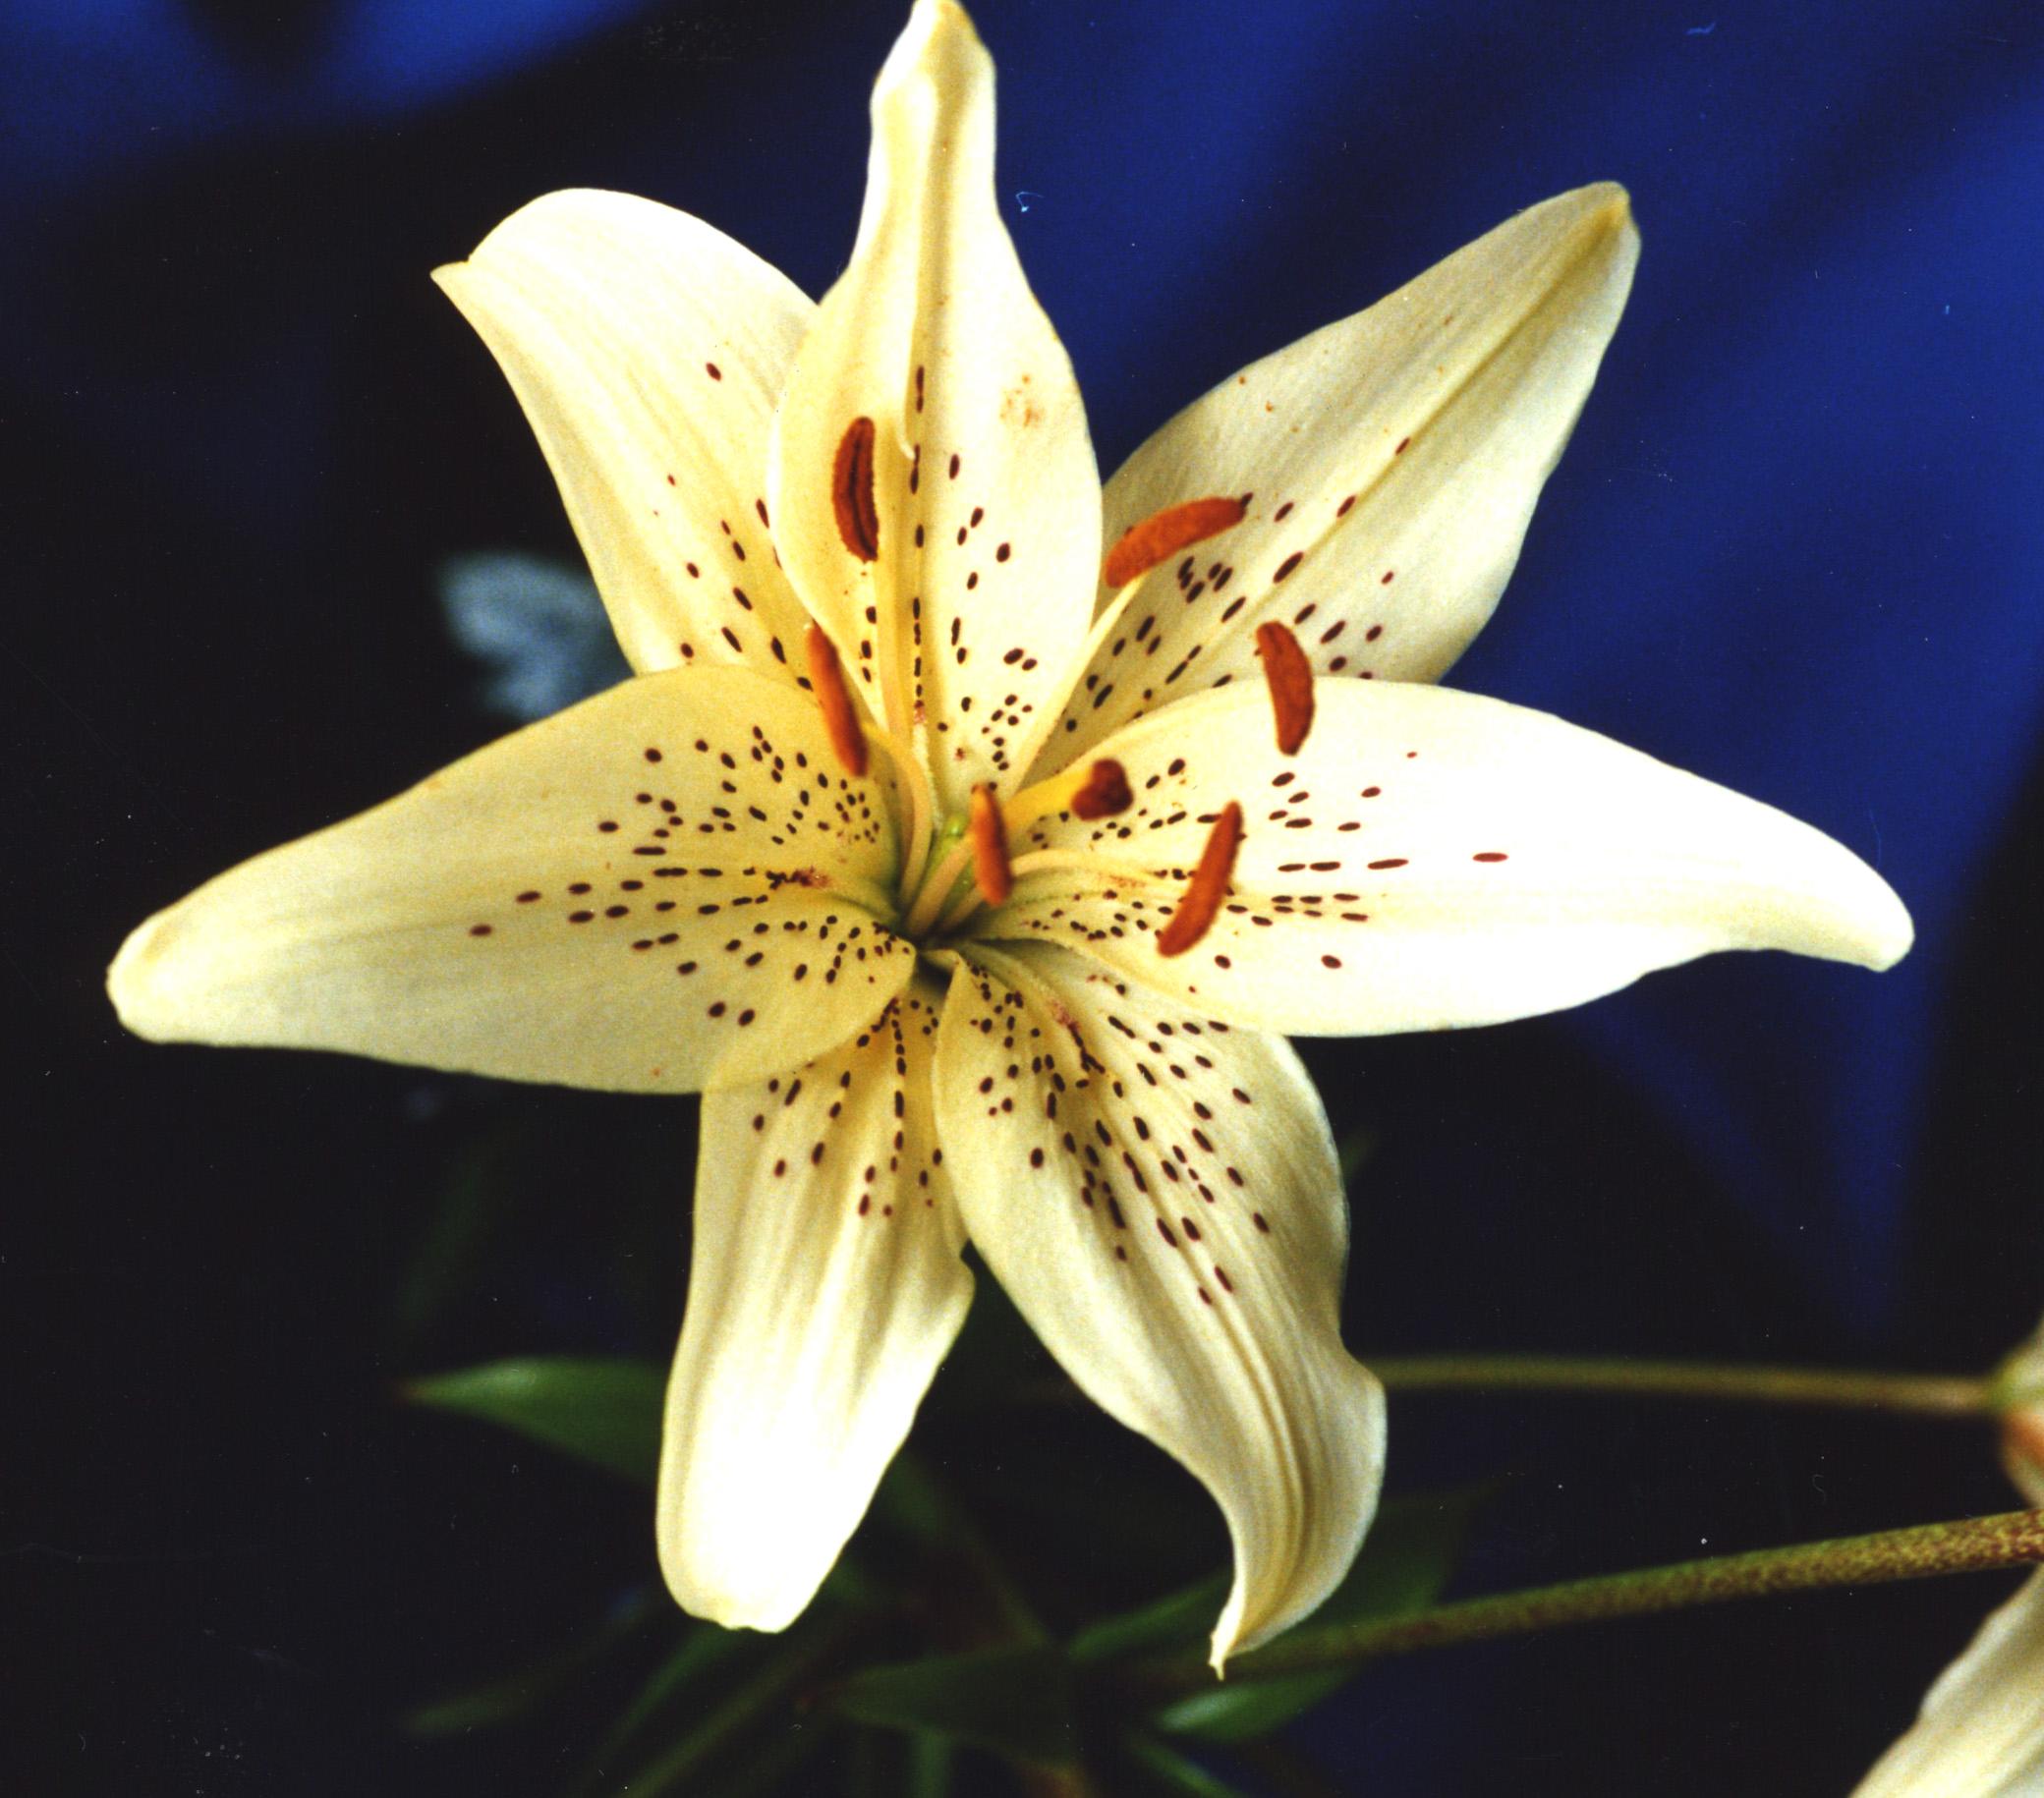 Lilies Asiatic Tiger 'White Tiger' - Outdoor Lilies (Shipping begins Jan. 2021) from Leo Berbee Bulb Company